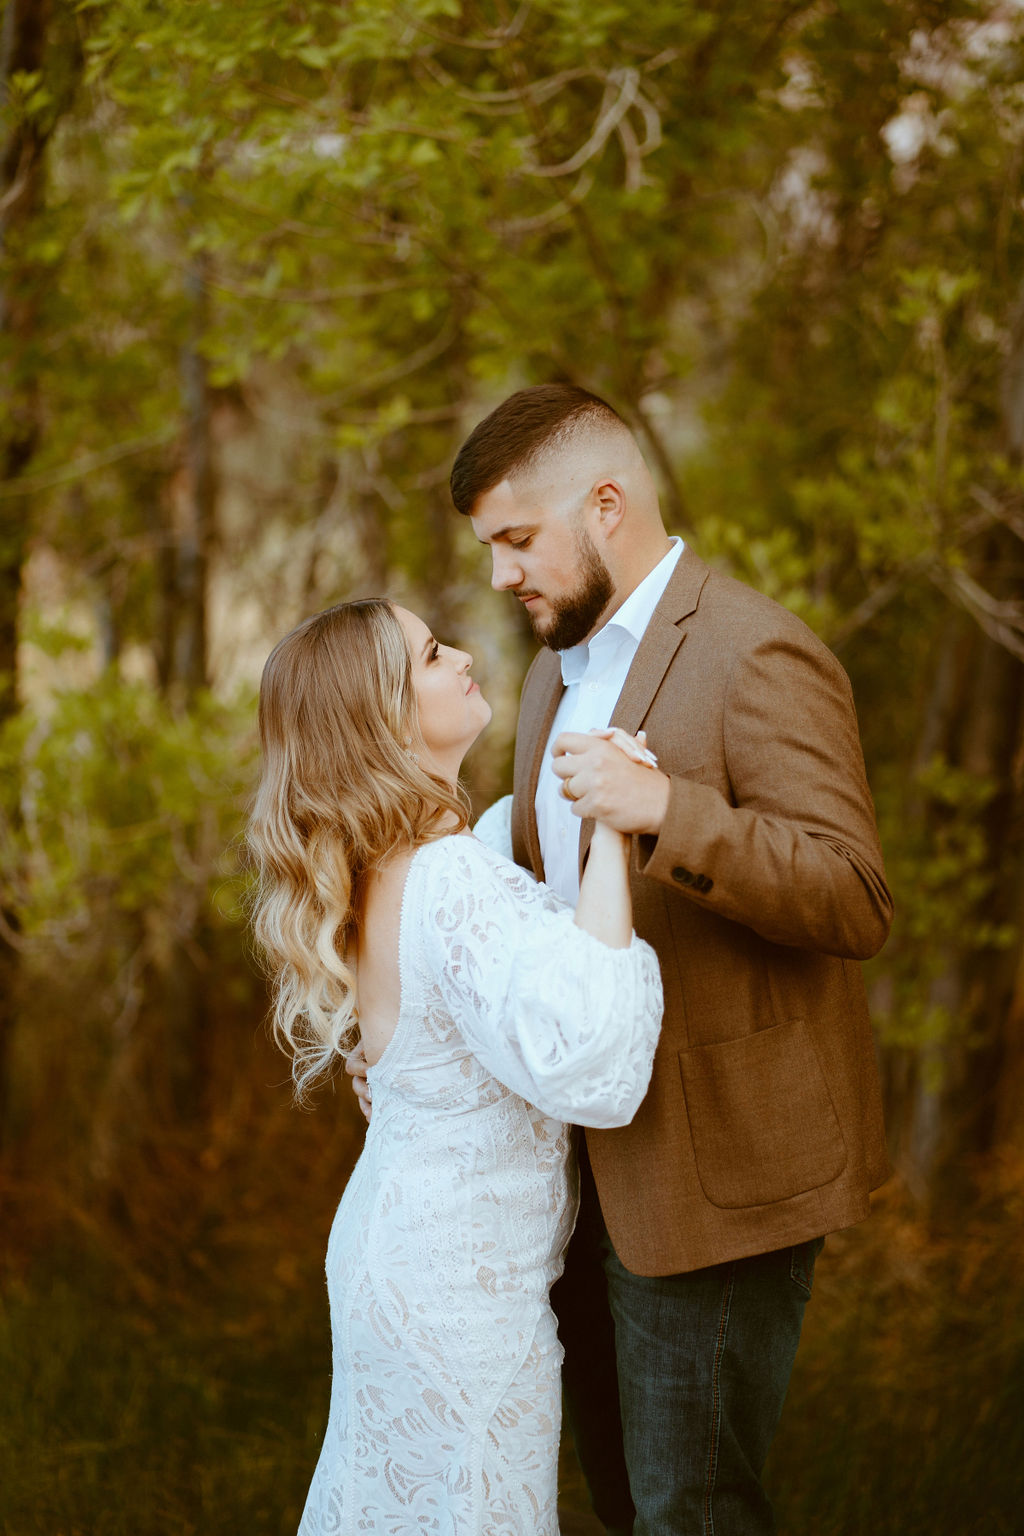 Rustic Boho Never Looked So Good! Bride and groom hold hands as they share their first dance. Bride is wearing a fitted white lace wedding dress with puffy sleeves. Groom is wearing a dark brown suit jacket, white shirt with no tie, and fitted dark blue jeans. 